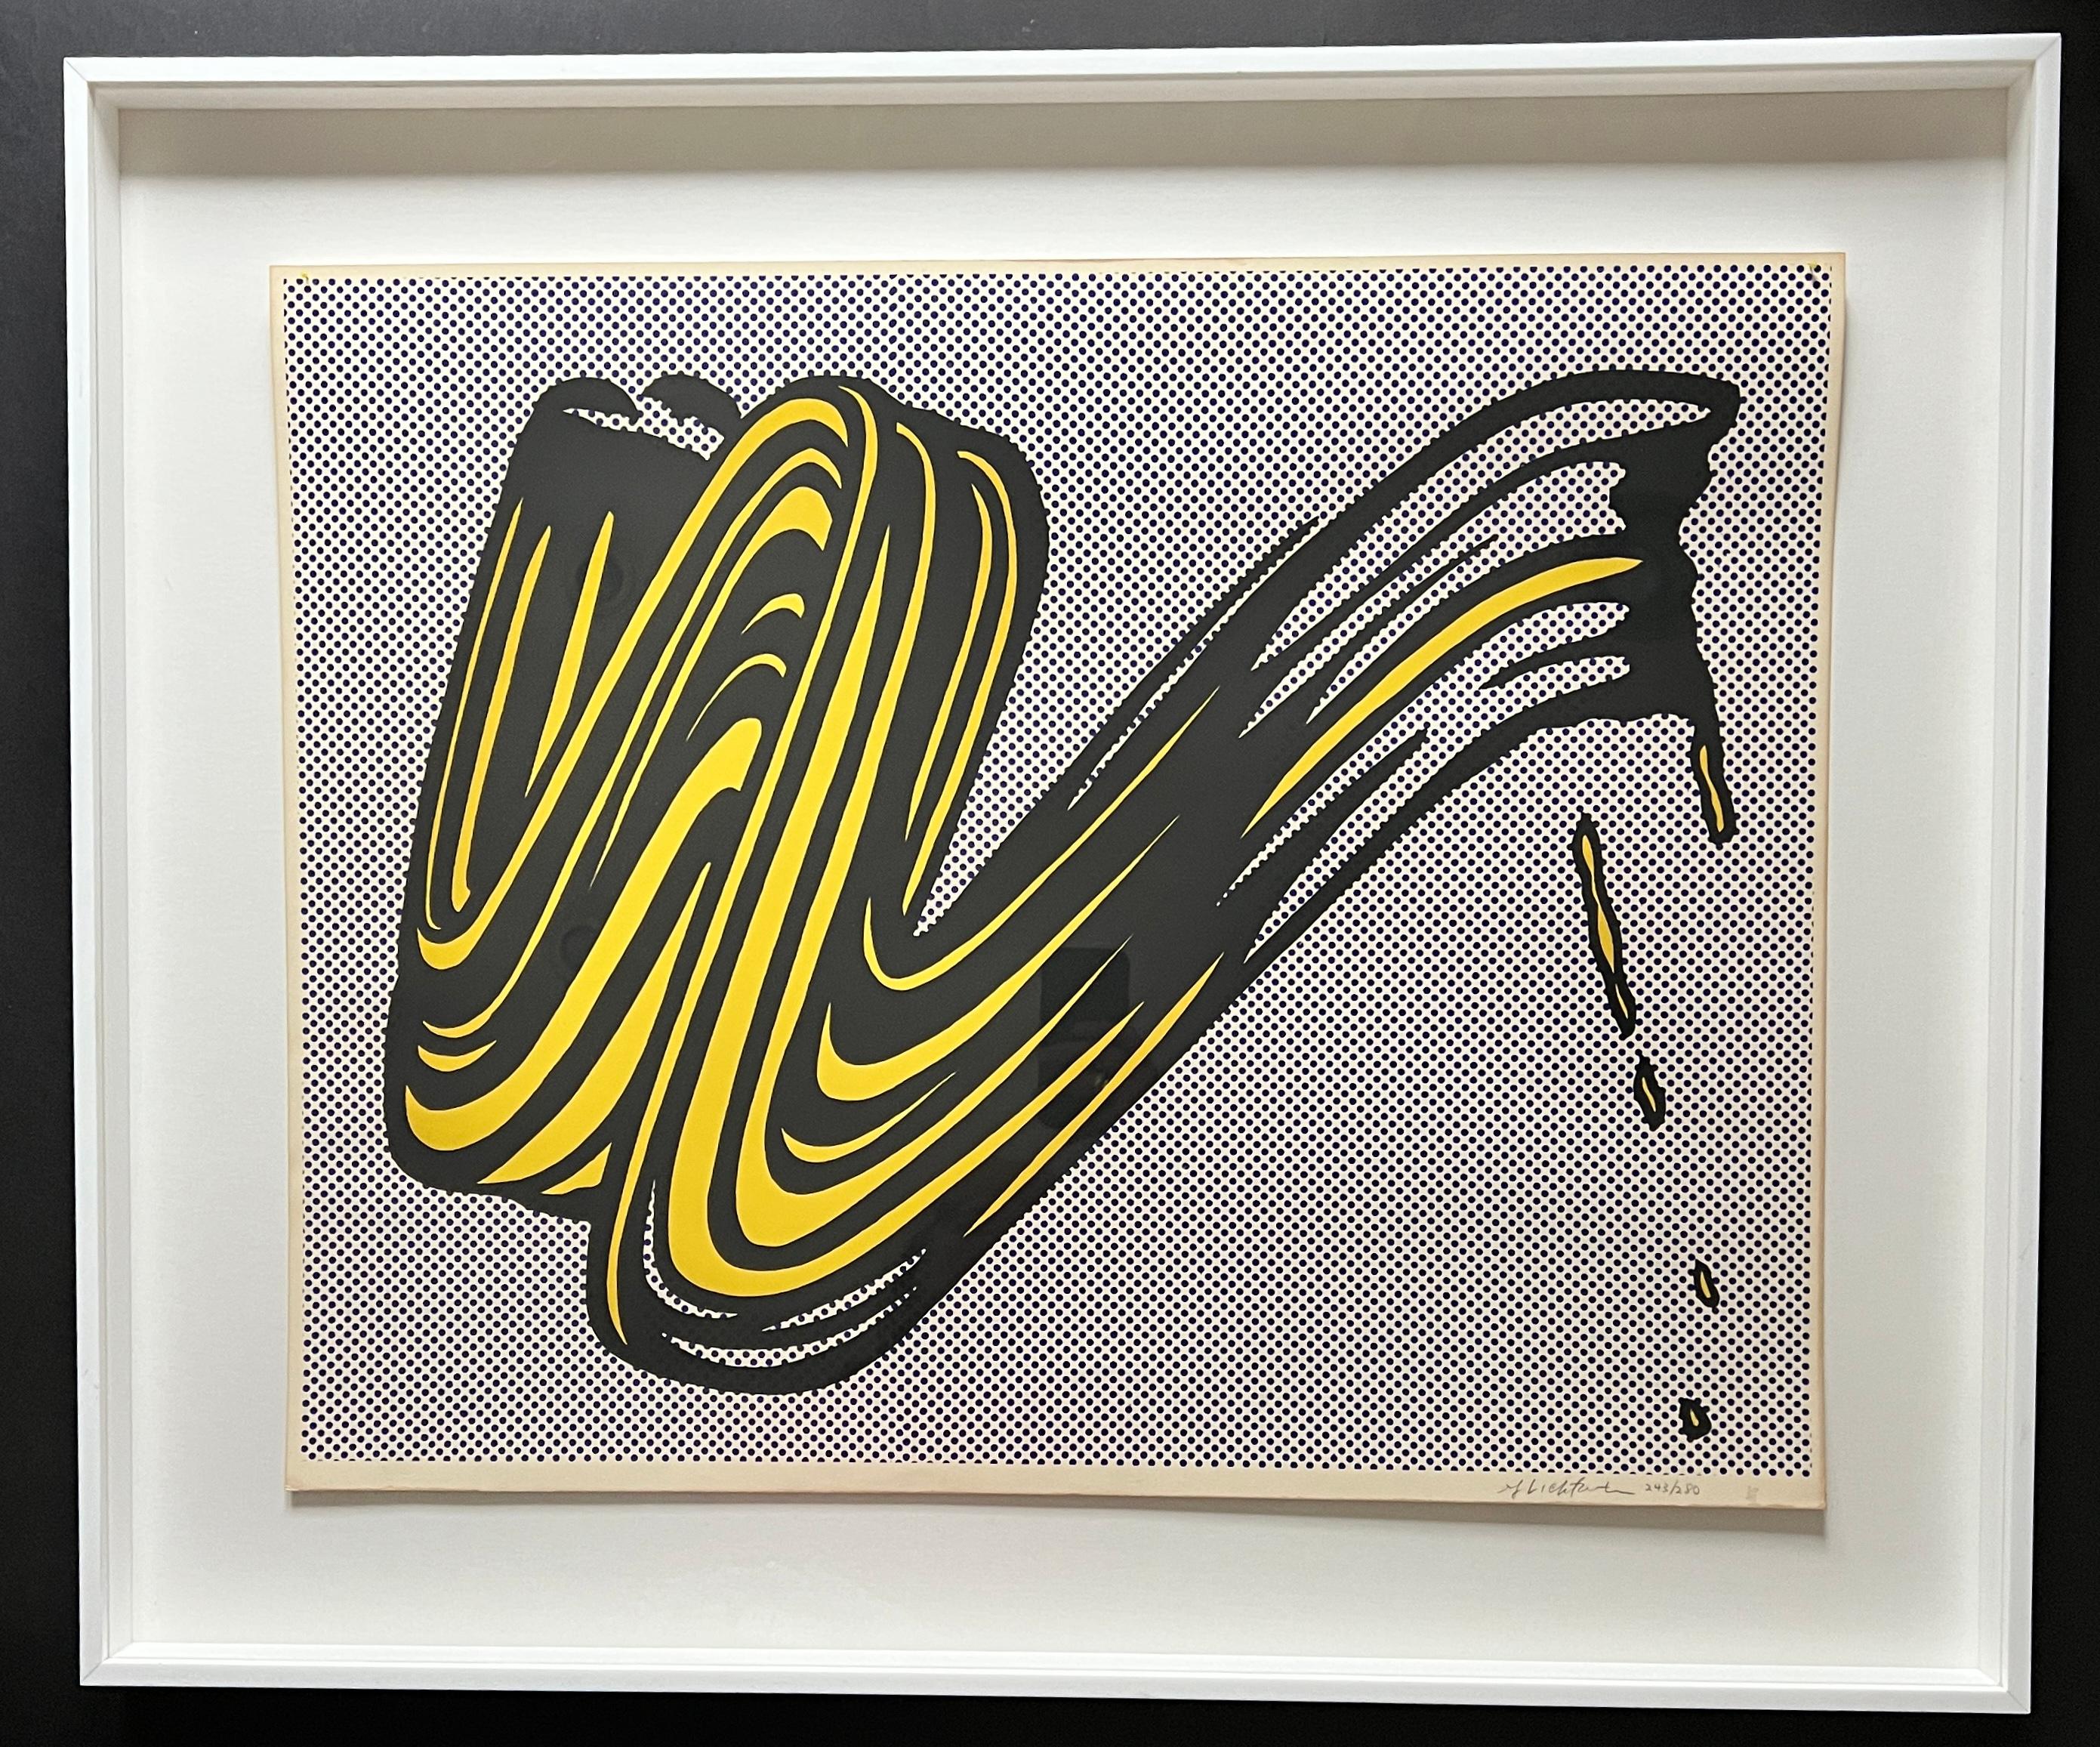 Screenprint on heavy, white wove paper , edited in 1965
Limited edition of 280 copies
signed in pencil by artist in lower right corner and numbered 243/280
paper size: : 58,4 x 73,6 cm ( 23 x 29 inch )
framed size: 76 x 91 cm
very good conditions